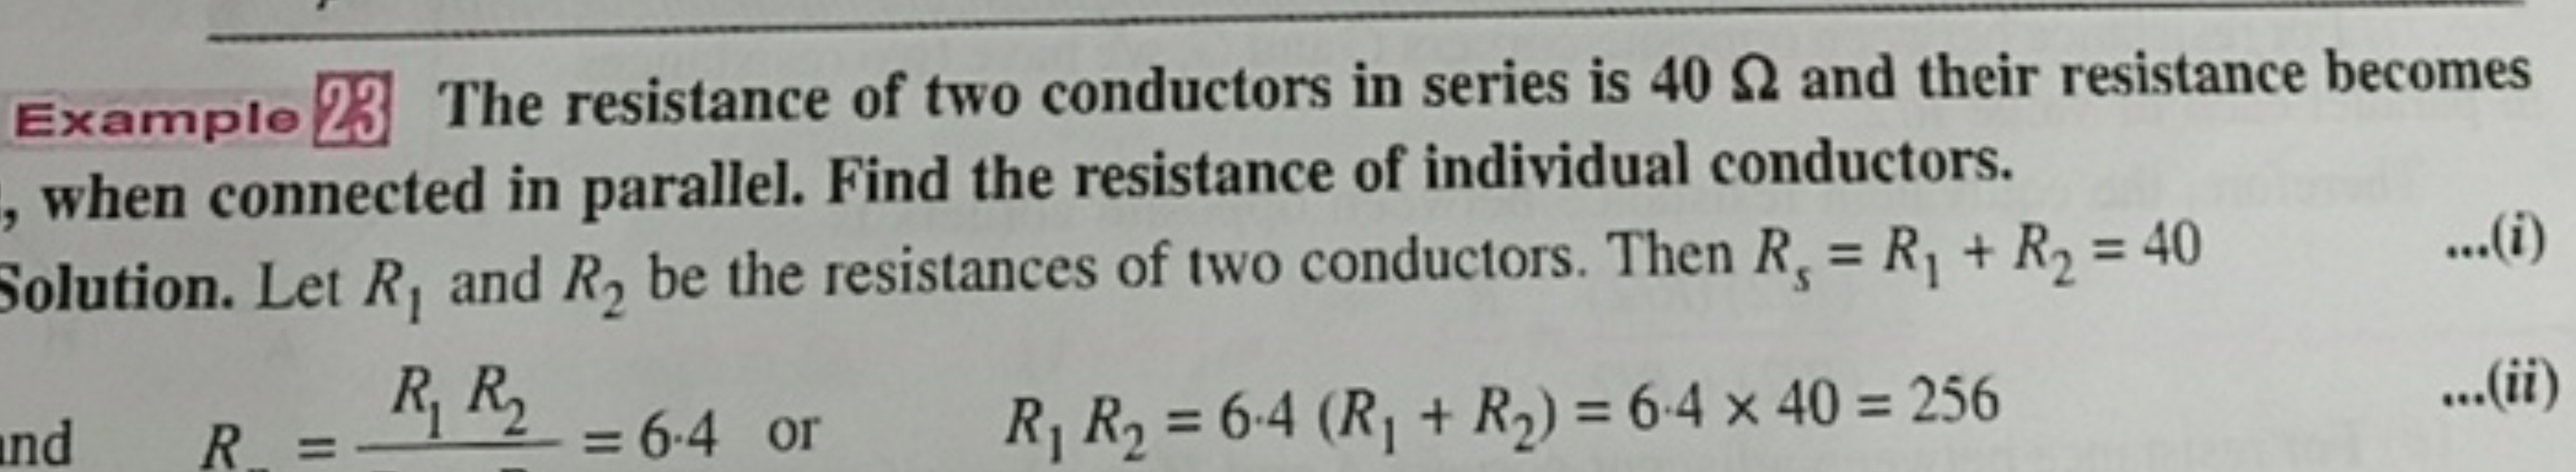 Example 23 The resistance of two conductors in series is 40Ω and their